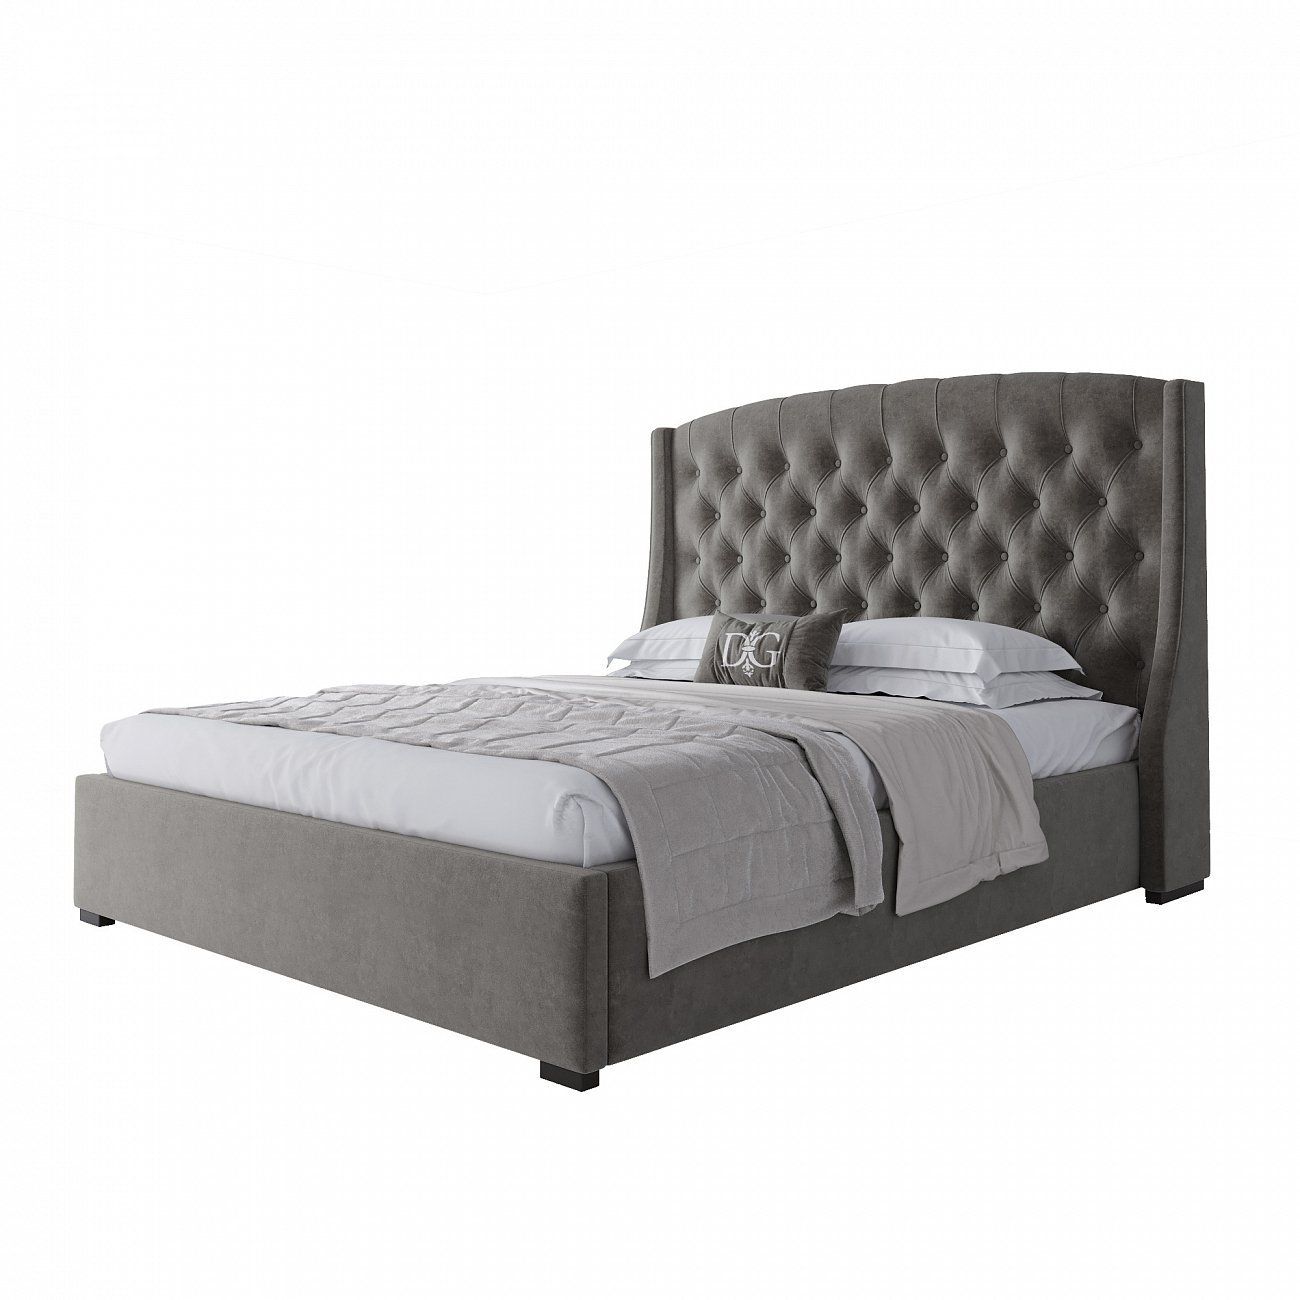 Double bed 160x200 grey-beige velour Hugo without studs P